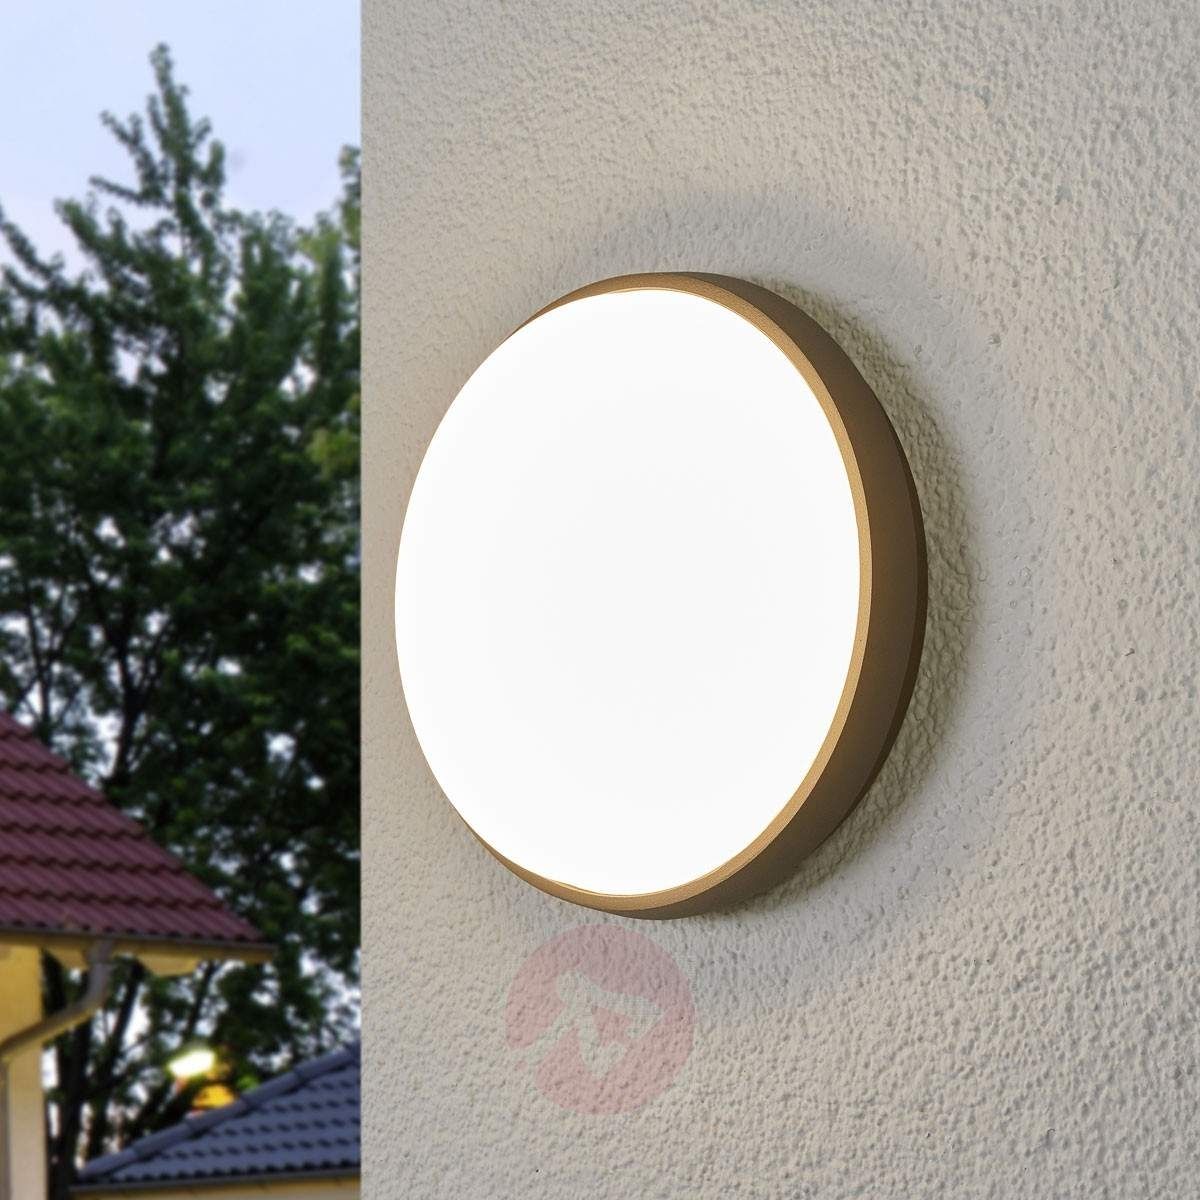 Amra – Led Outdoor Ceiling Light With Round Shape | Lights (View 9 of 15)